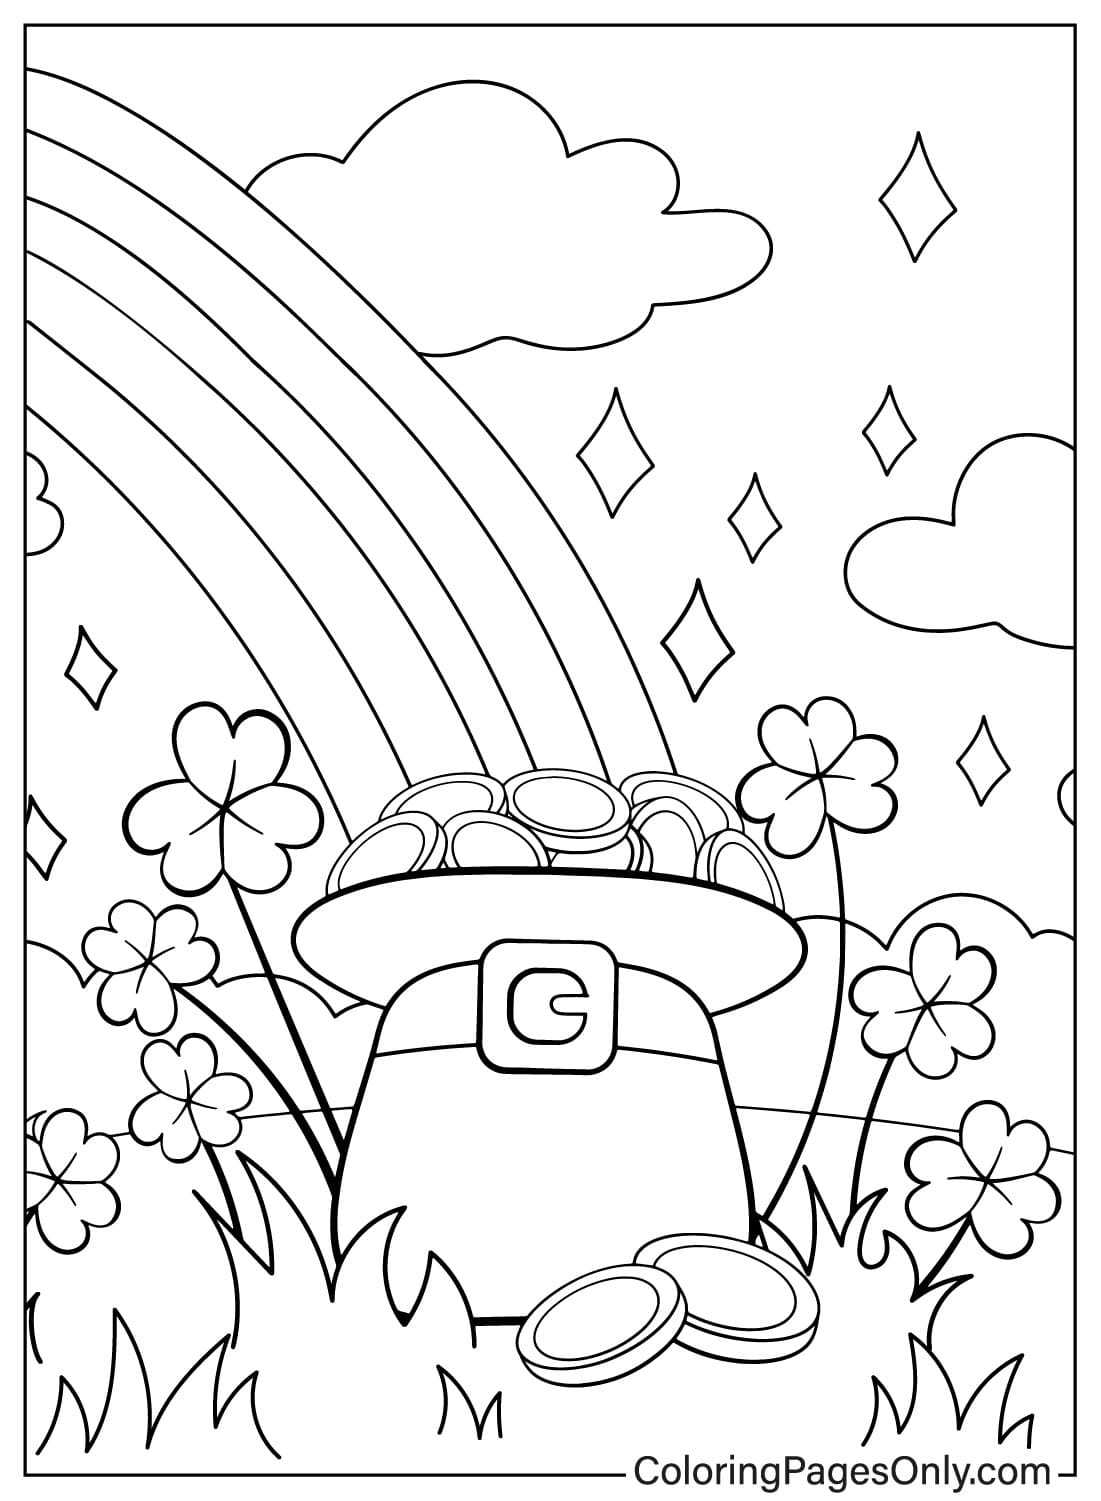 Lucky Charms Coloring Page to Print from Lucky Charms